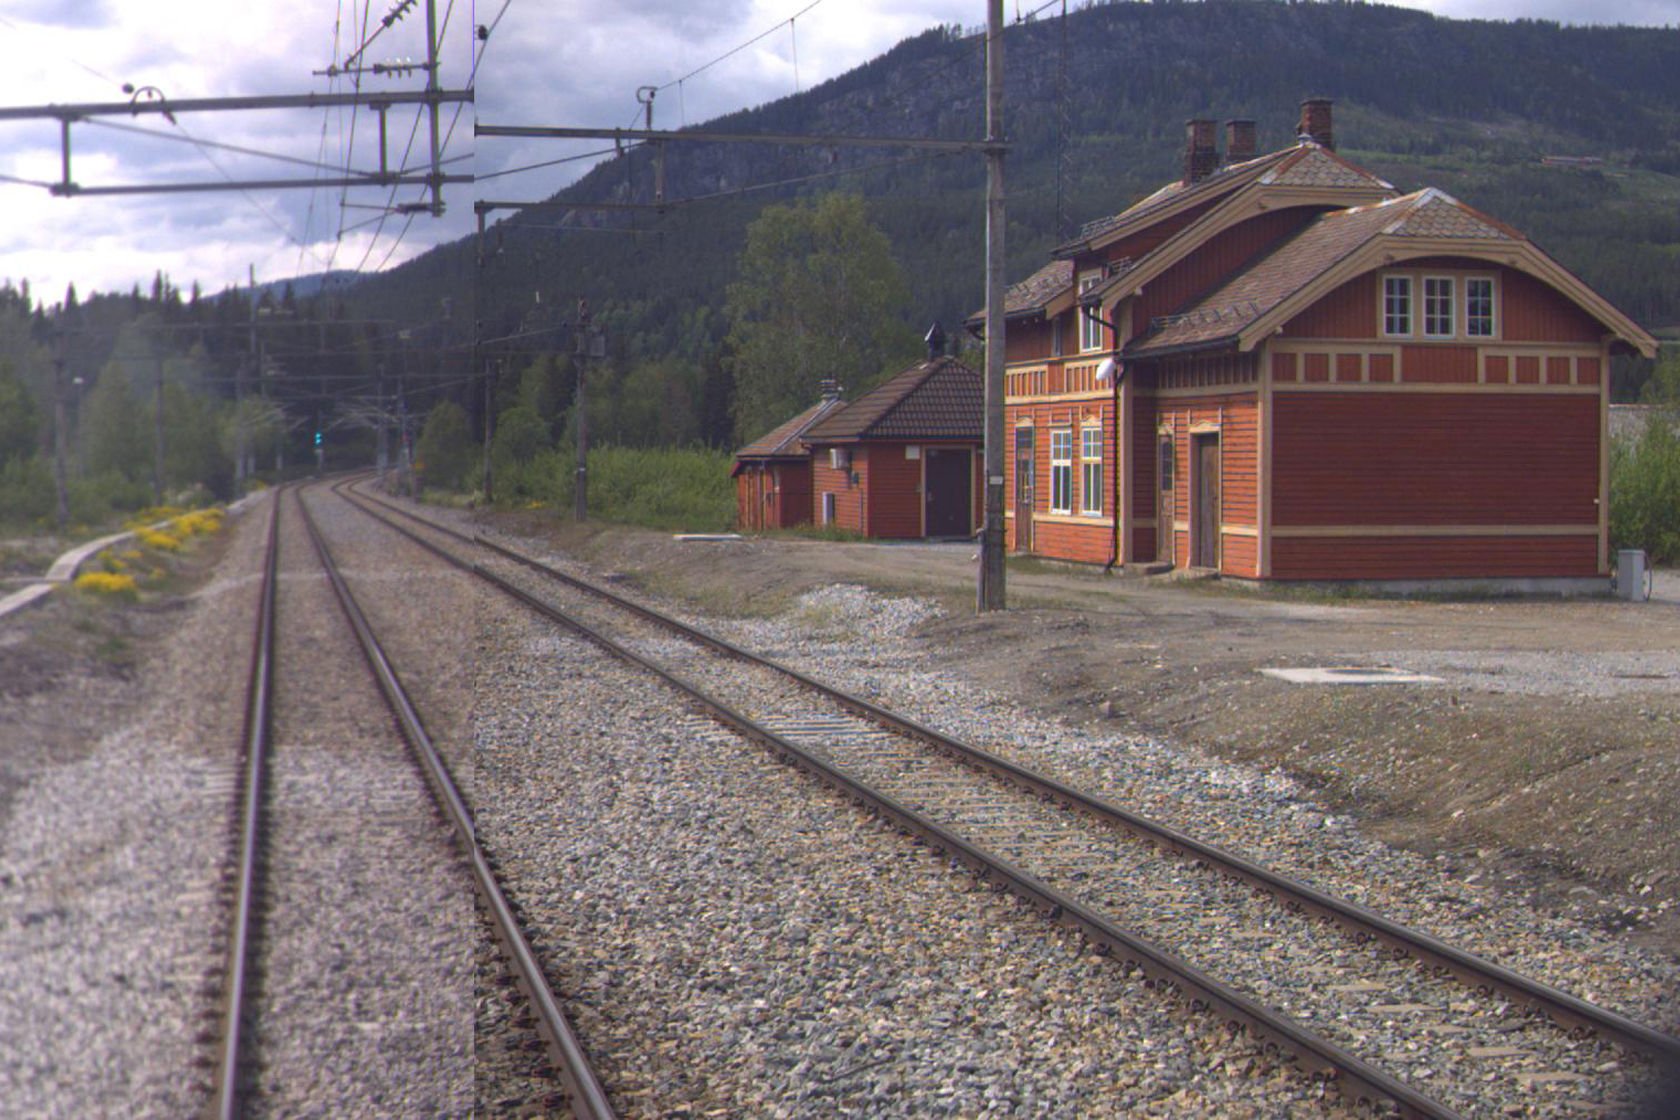 Tracks and station building at Torpo station